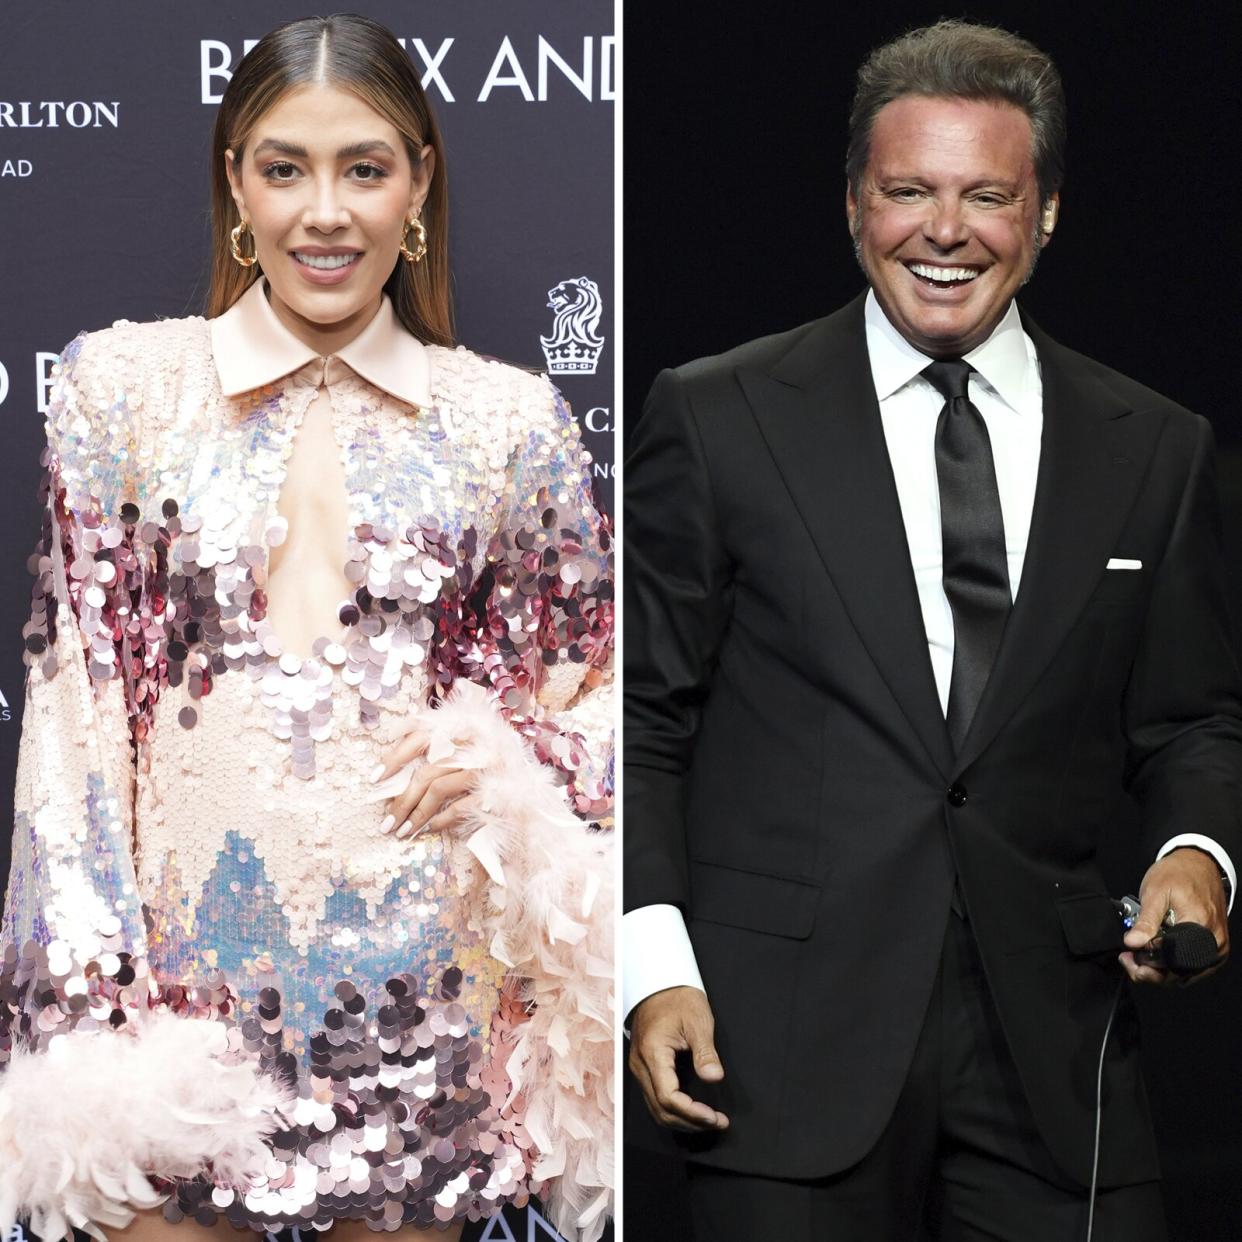 Michelle Salas y Luis Miguel. Sean Zanni/Getty Images for Bronx & Banco; Ethan Miller/Getty Images